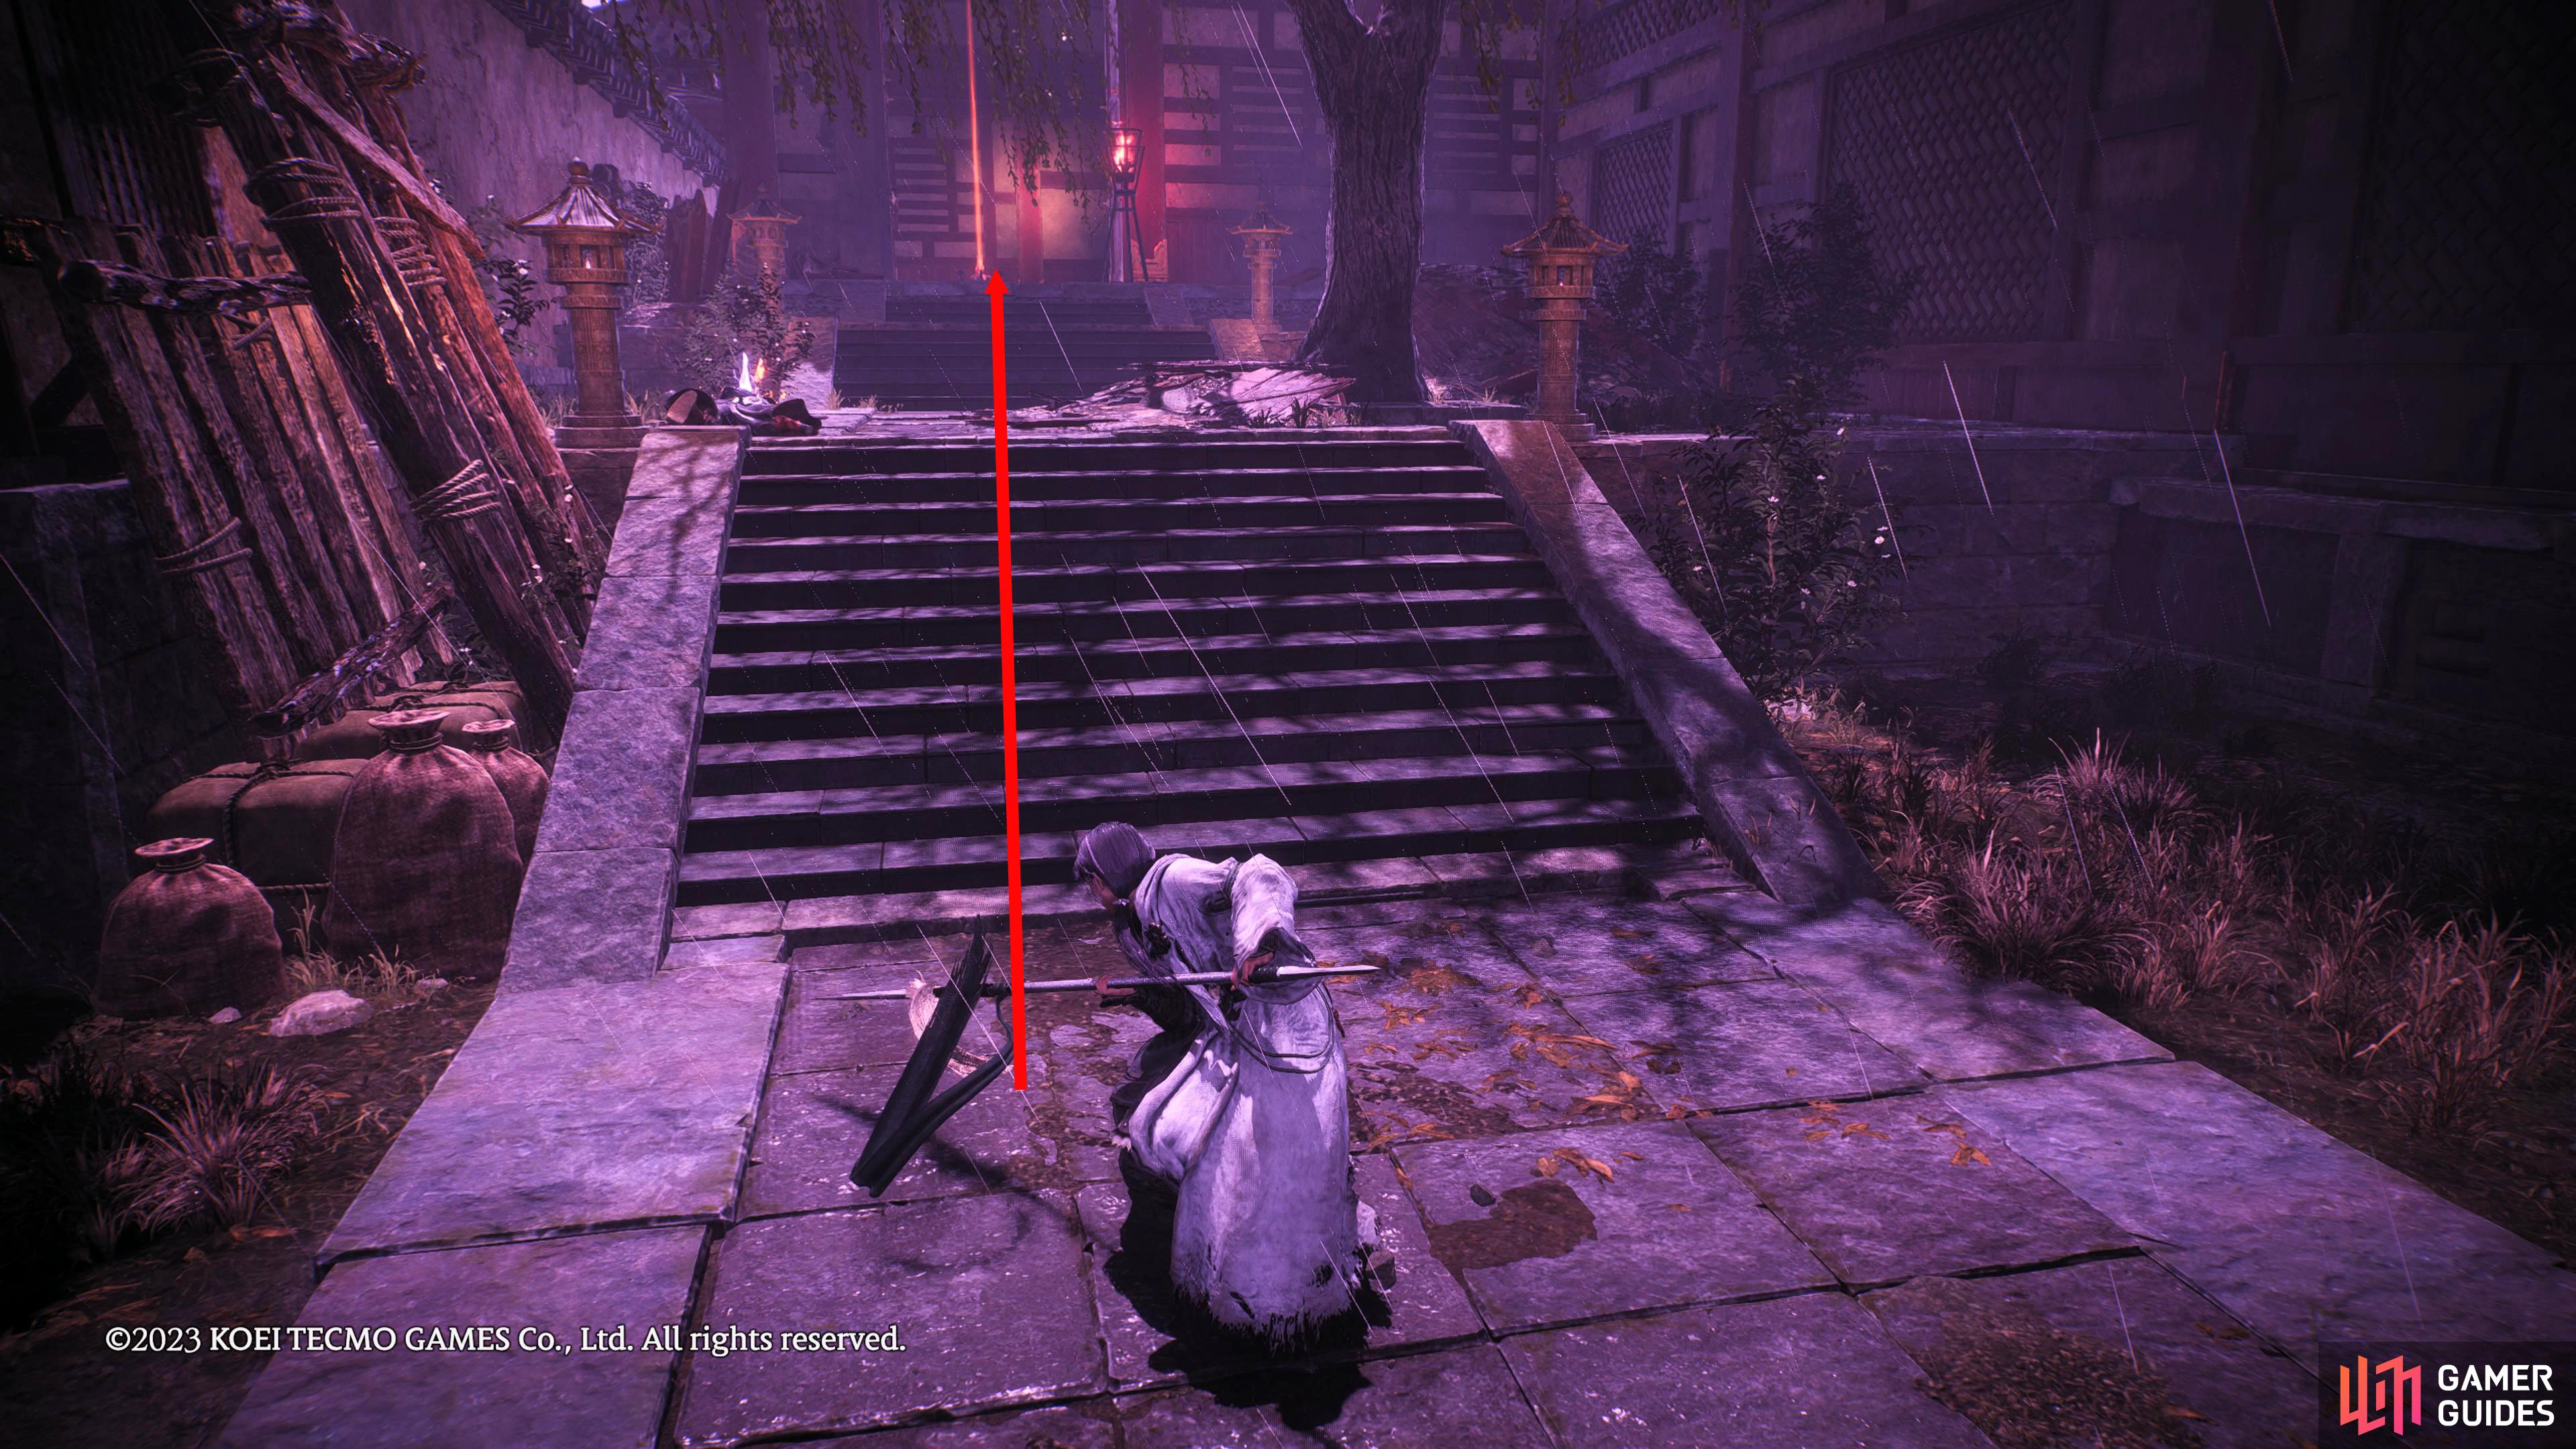 Follow the linear path until you reach these stairs. Two assassins will drop to ambush you.